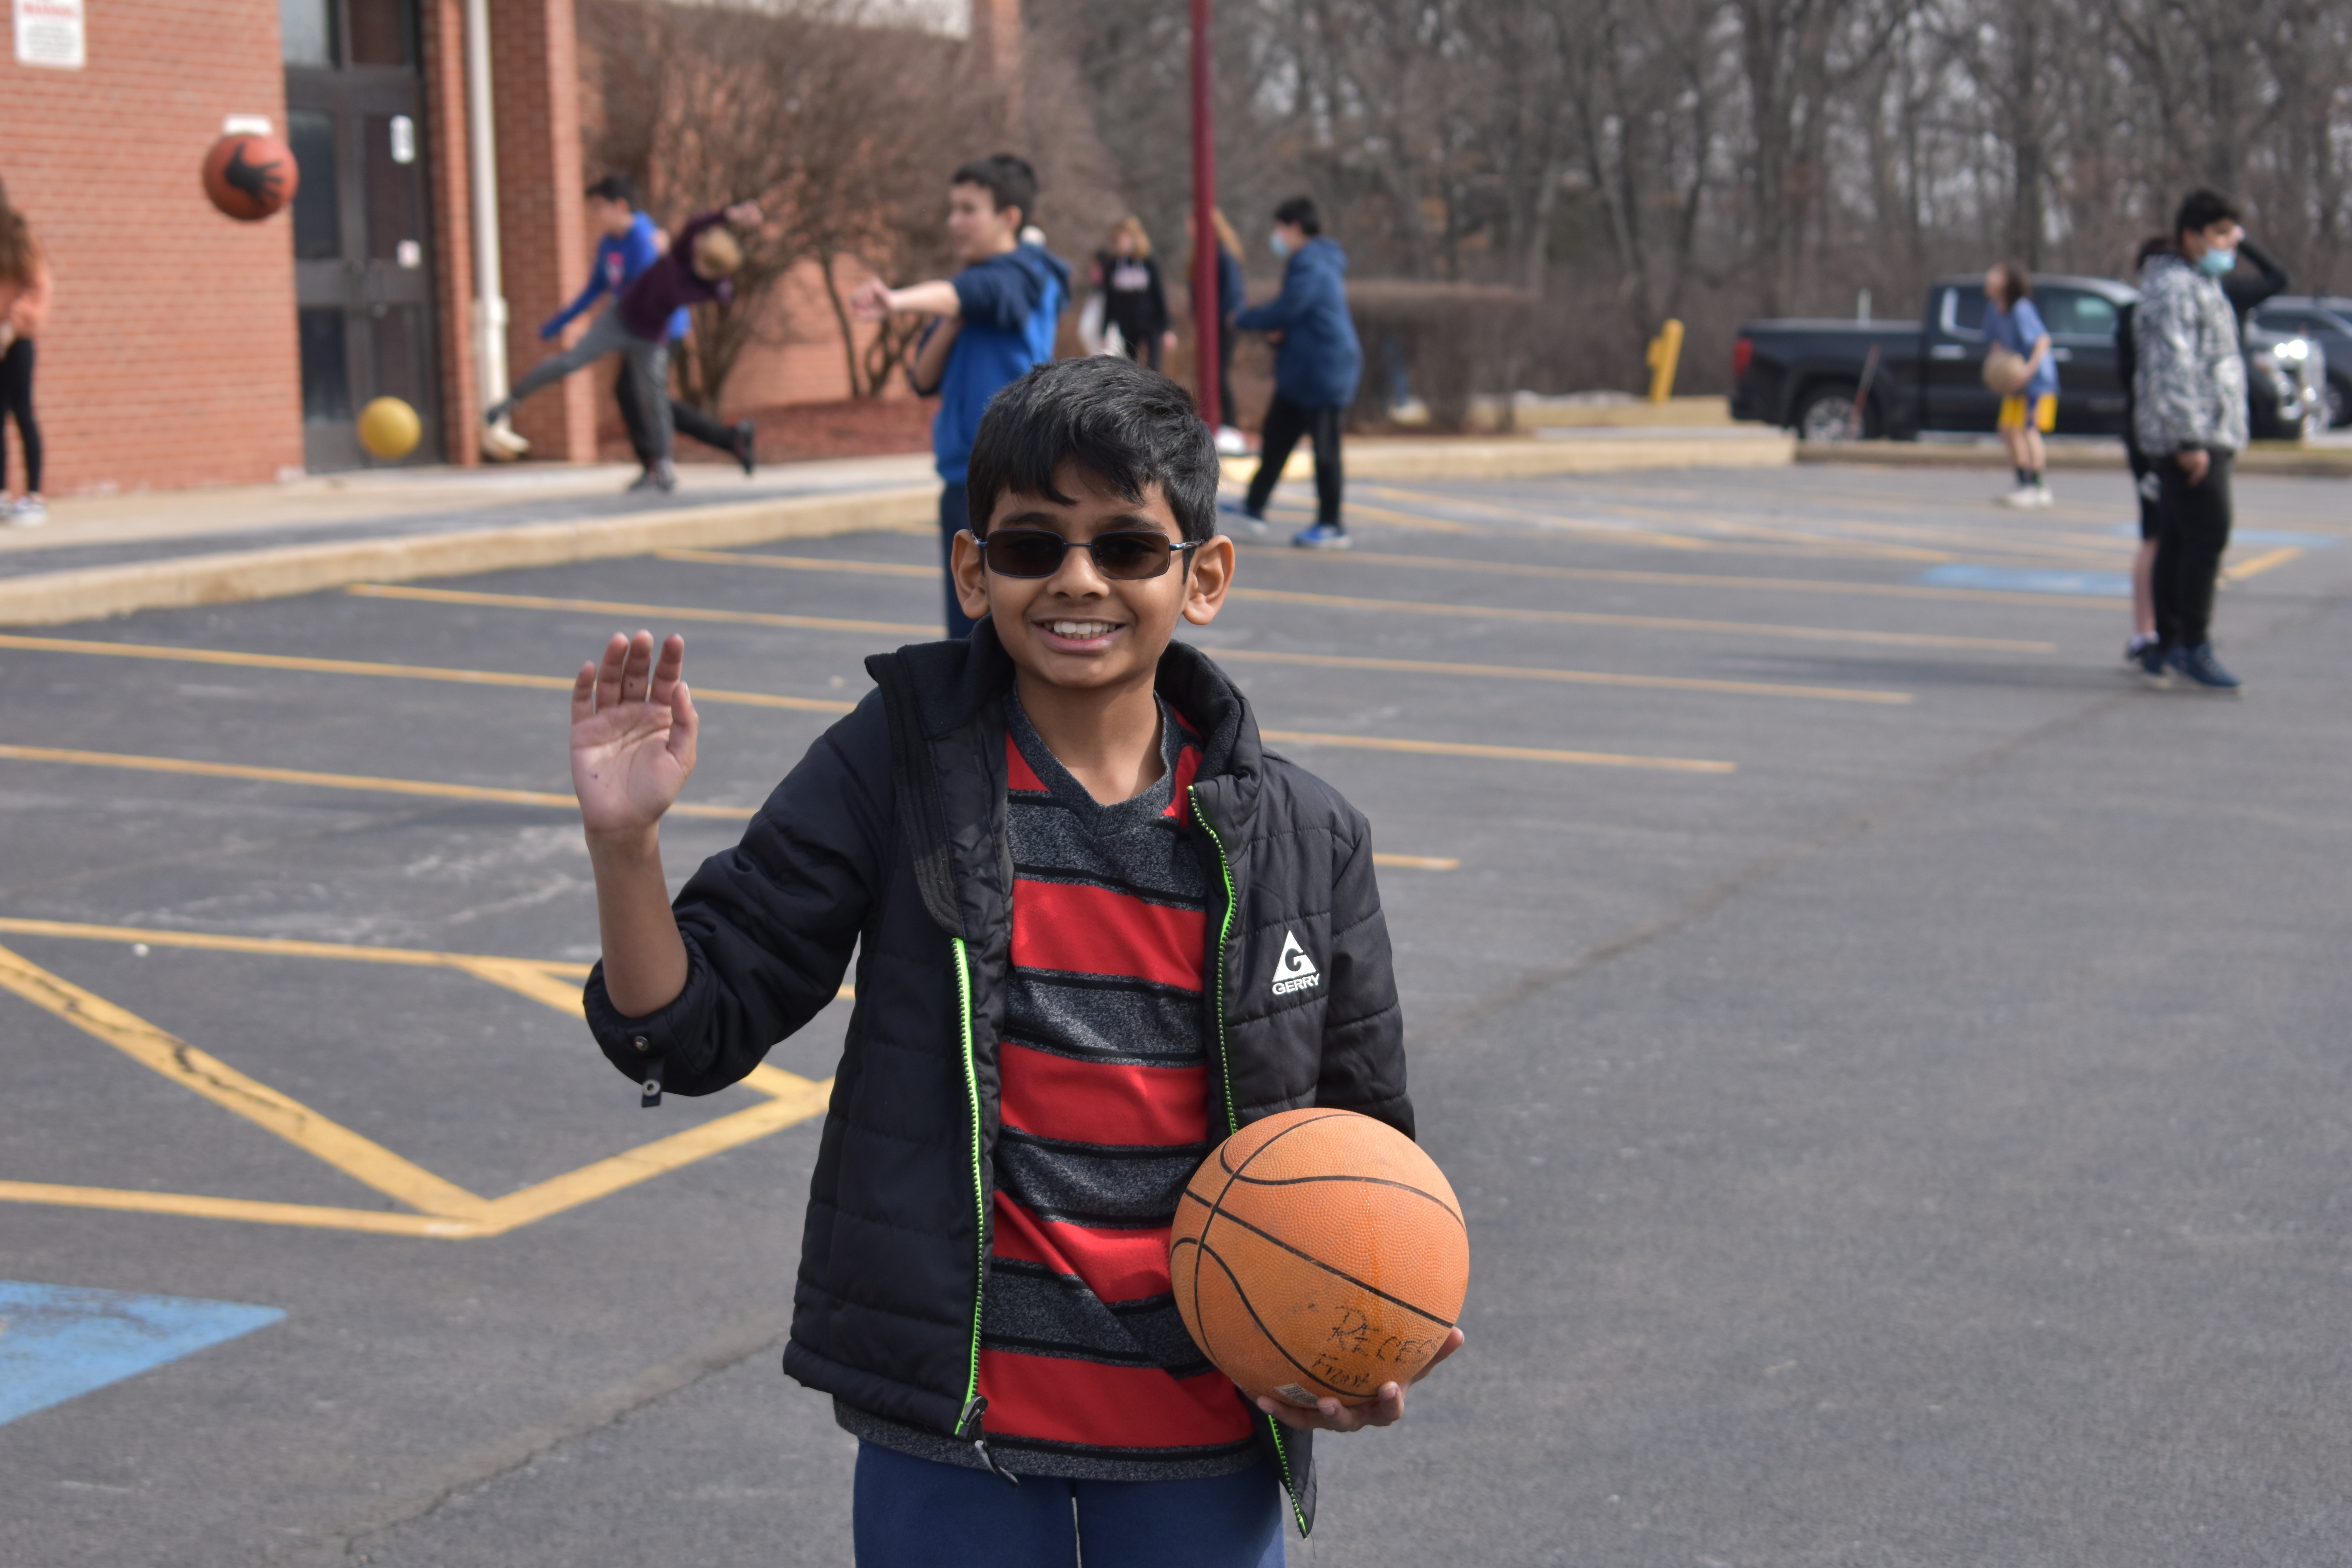 student holding a basketball and waving from the blacktop in front of the school